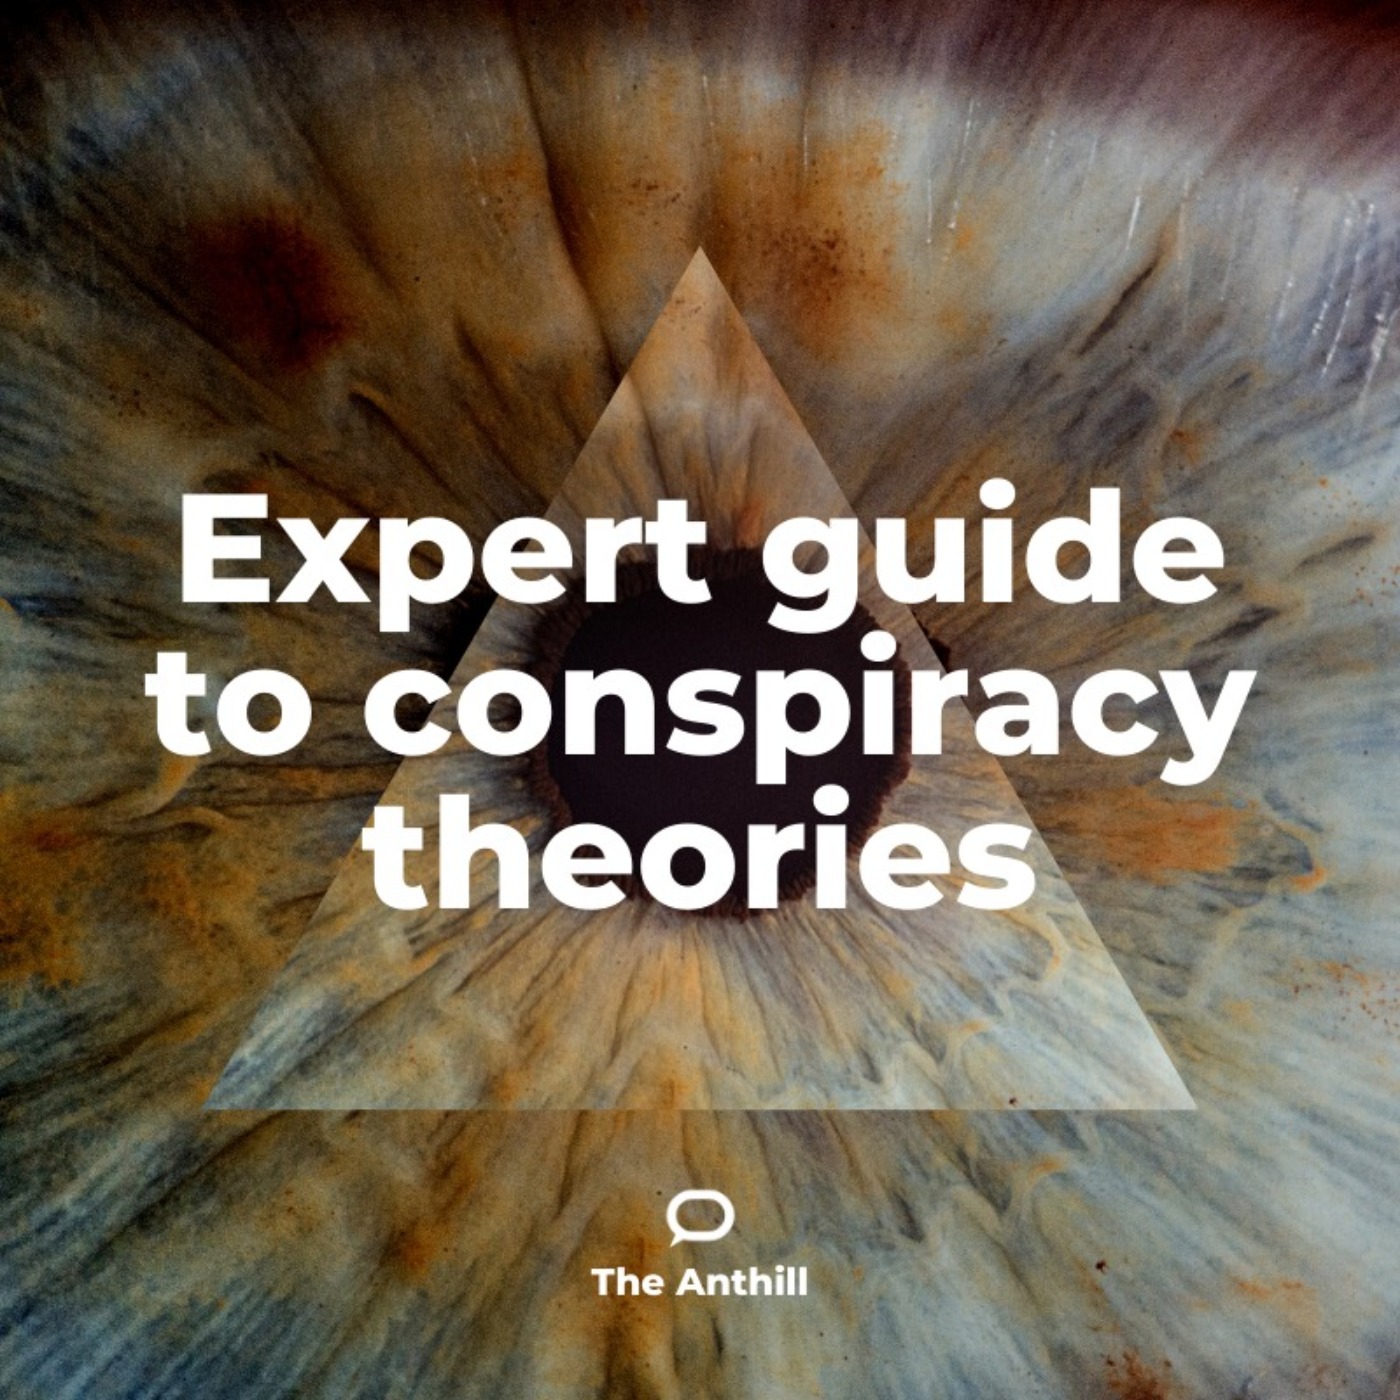 Expert guide to conspiracy theories part 4 – how they spread